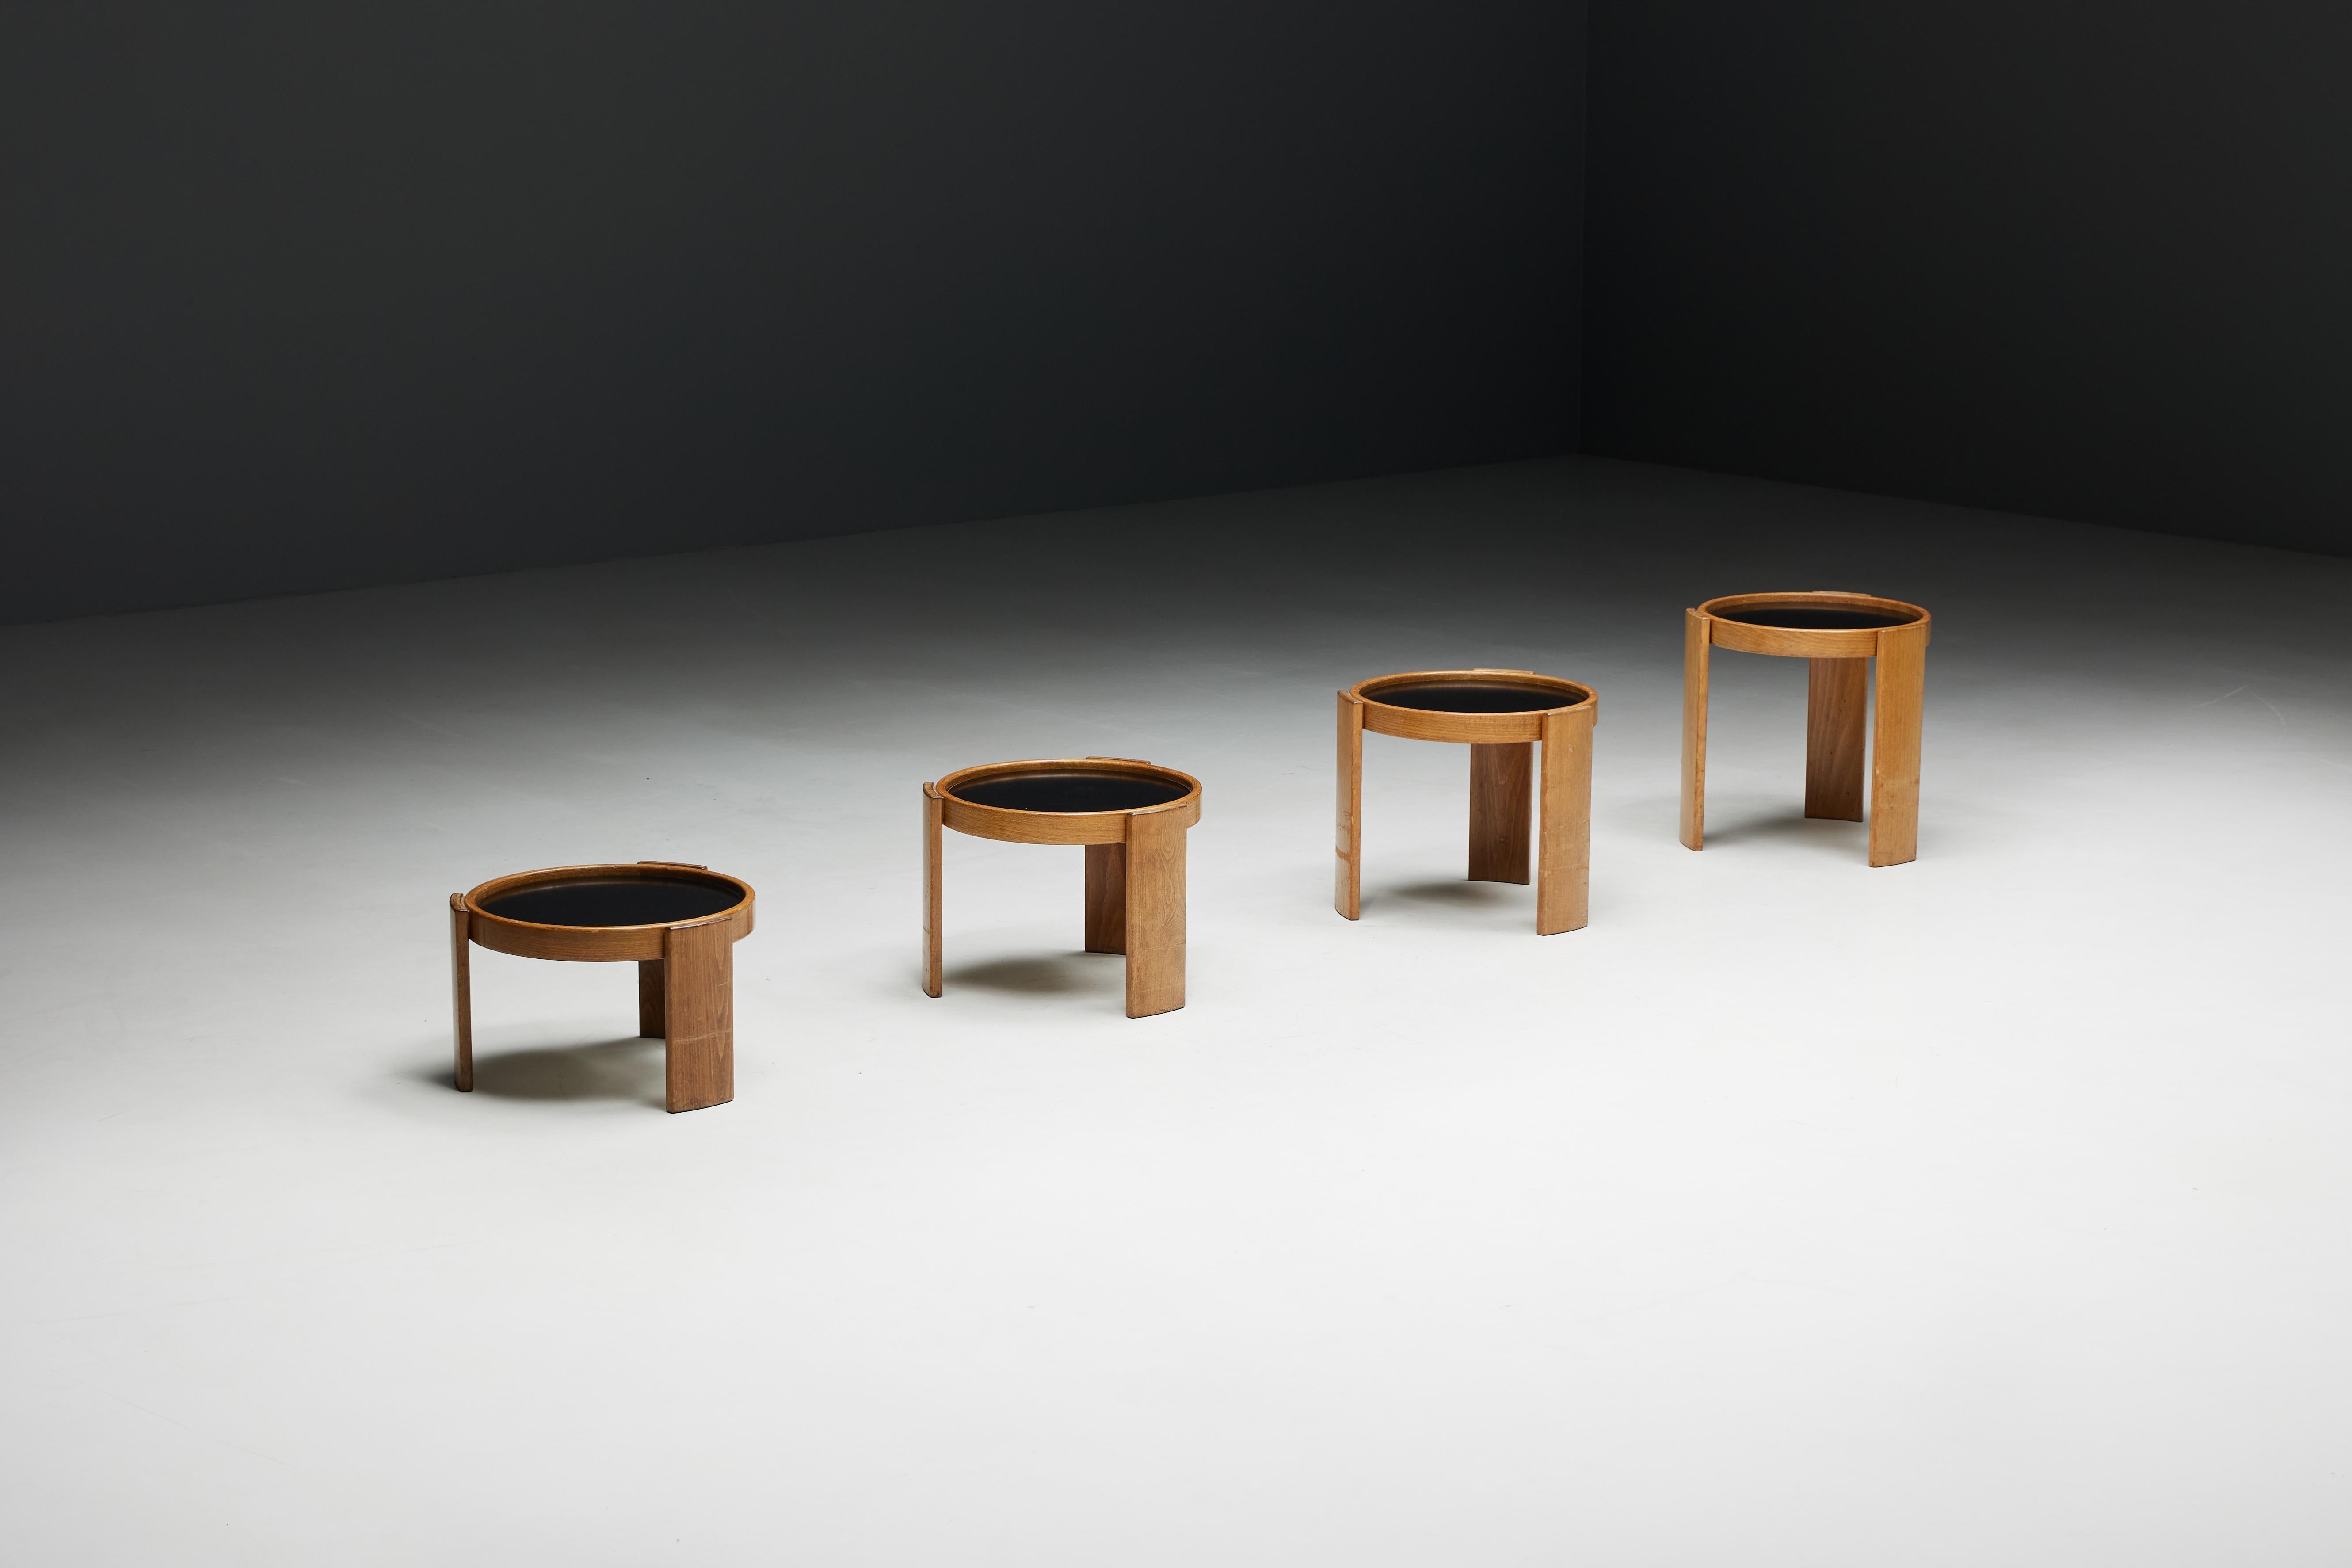 Set of four modular nesting tables by Gianfranco Frattini for Cassina, Model 780. Crafted in 1966 and constructed from original walnut, these side tables feature laminated tops with reversible black or white sides, providing versatility to suit your